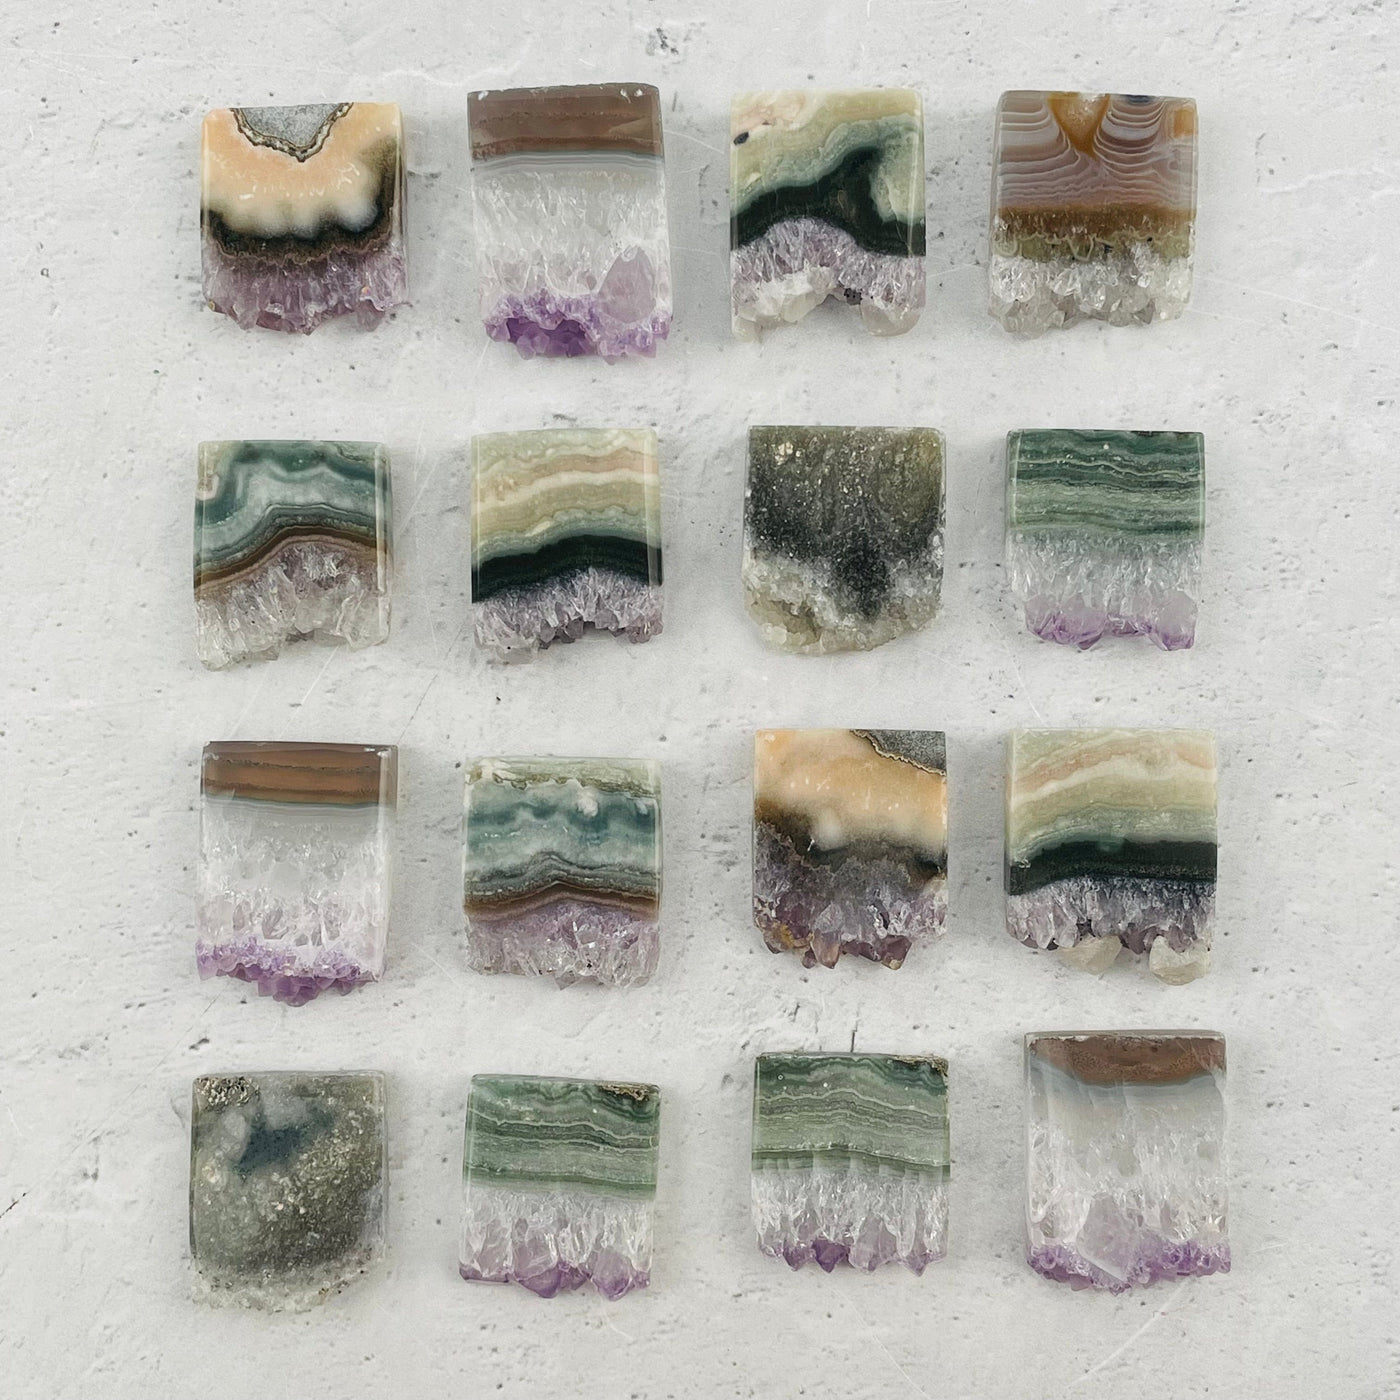 multiple amethyst slices displayed to show the differences in the color shades